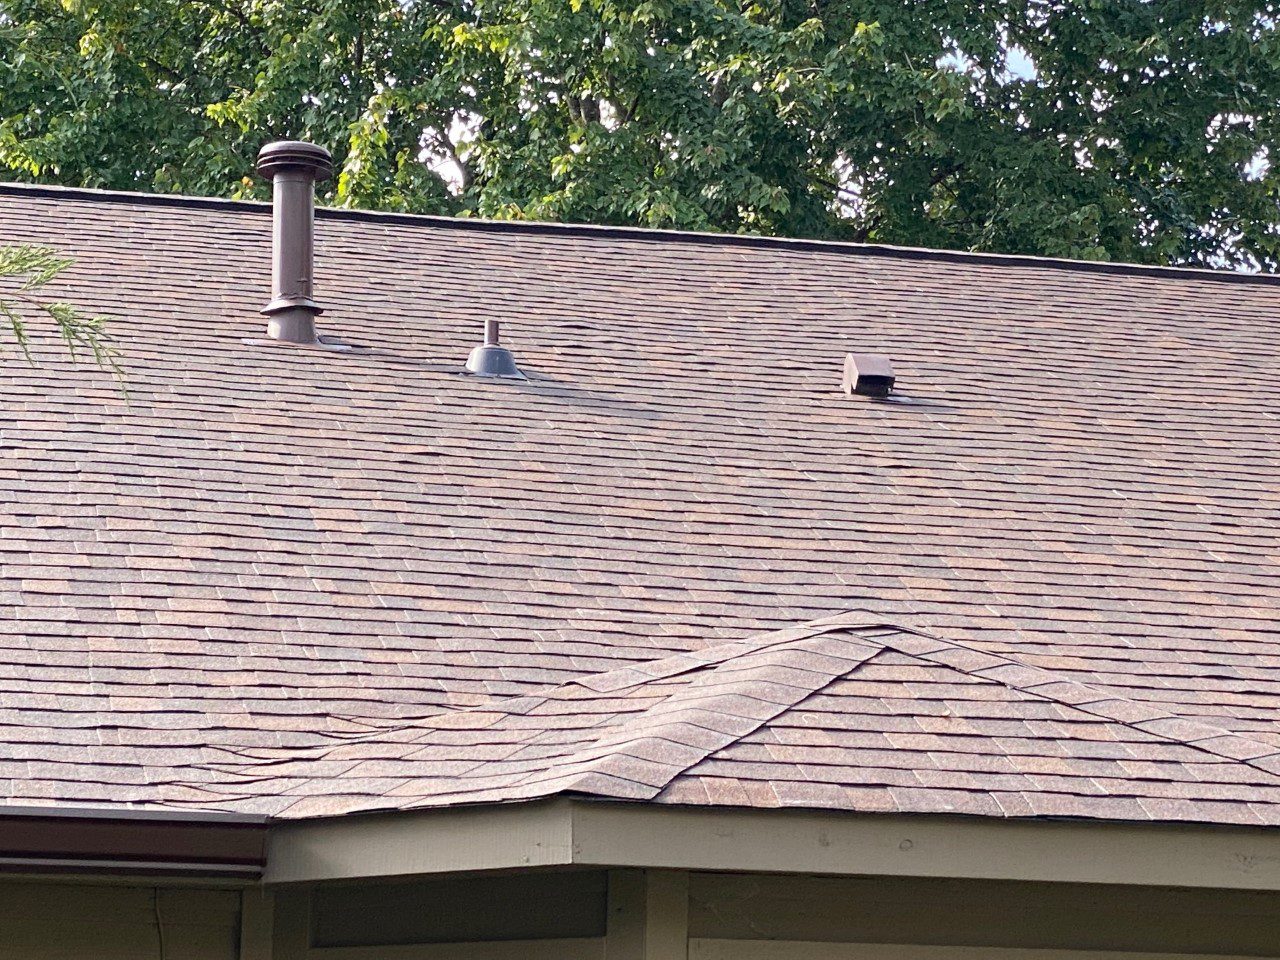 Belk Builders used an Owens Corning architectural shingle in Oakridge, Brownwood color for this recent installation.